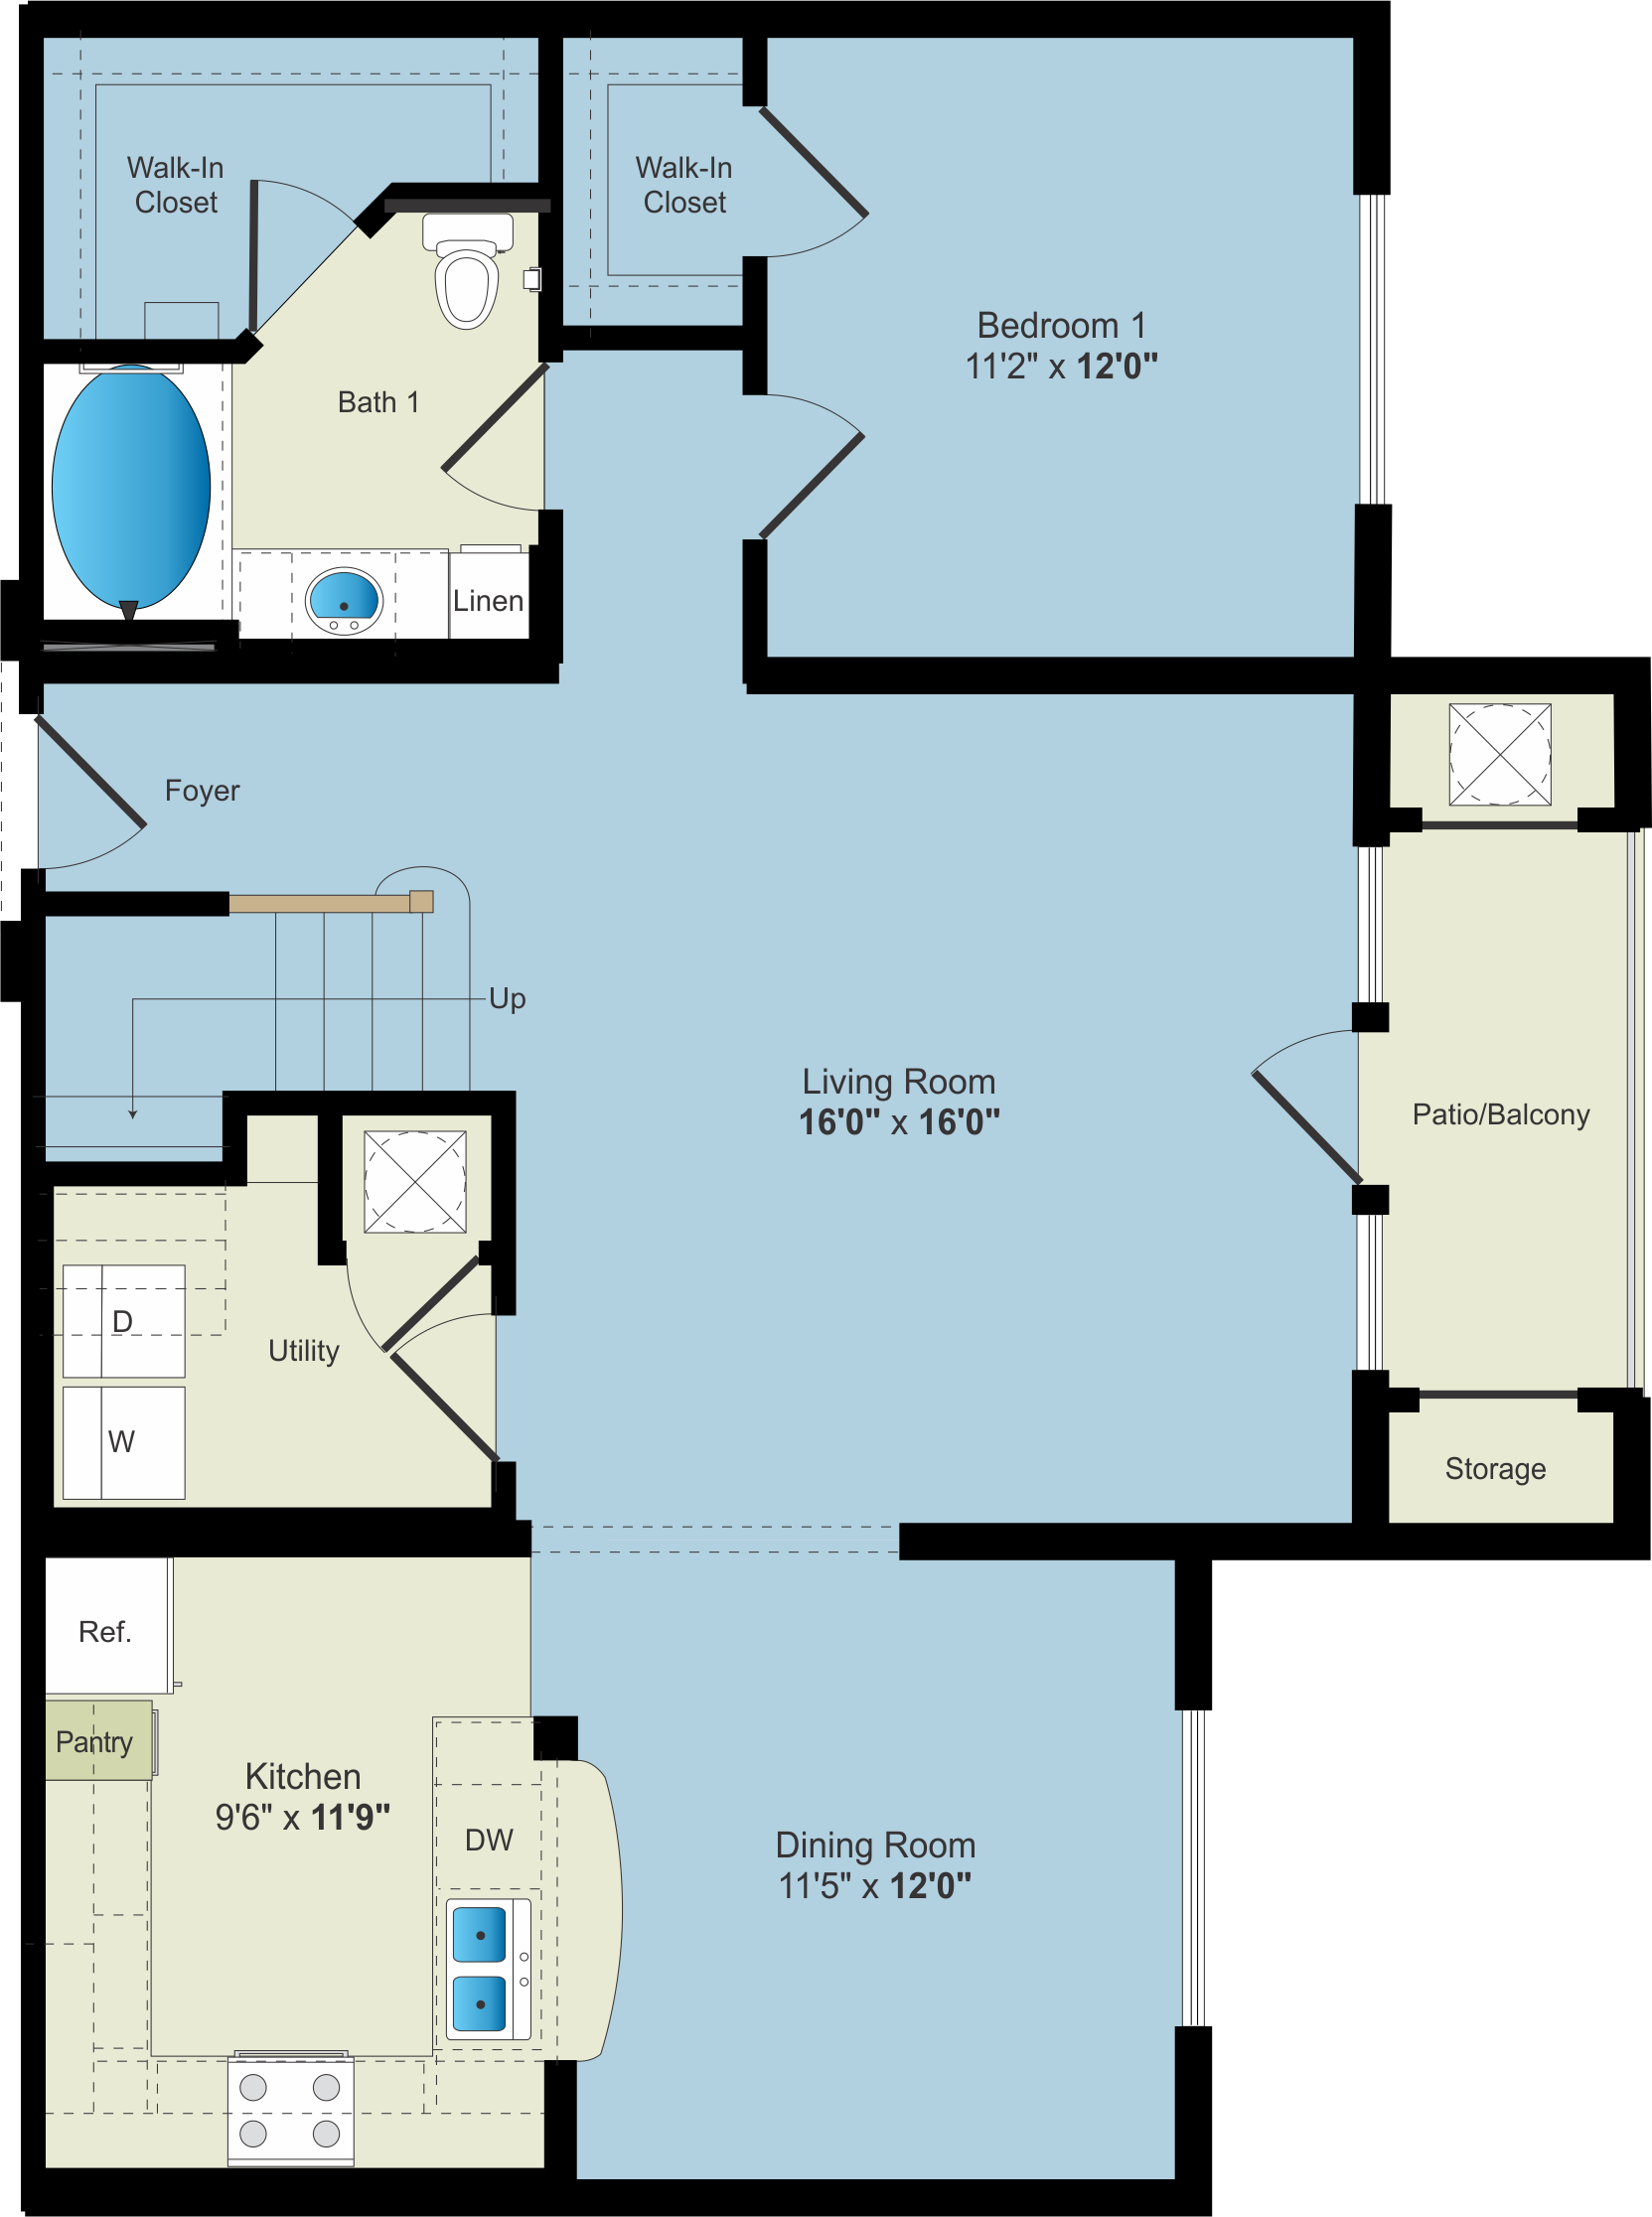 A floor plan for a two bedroom apartment available for Apartment Rentals.